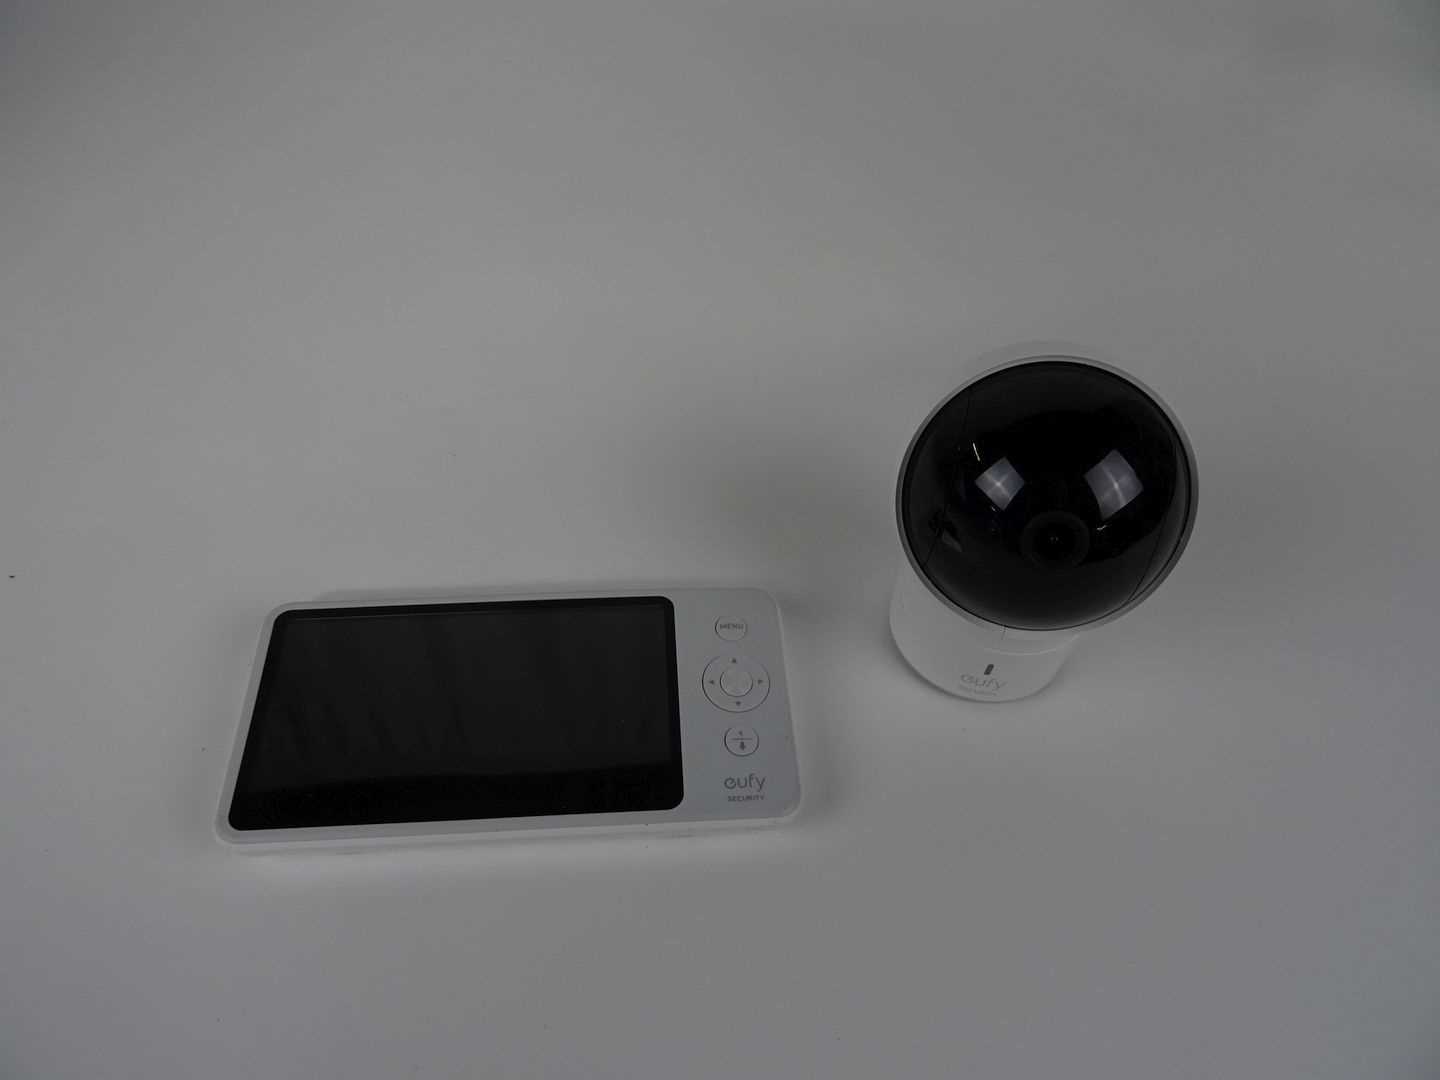 Los 277 - Babyphone eufy (Anker) SpaceView T83003D4